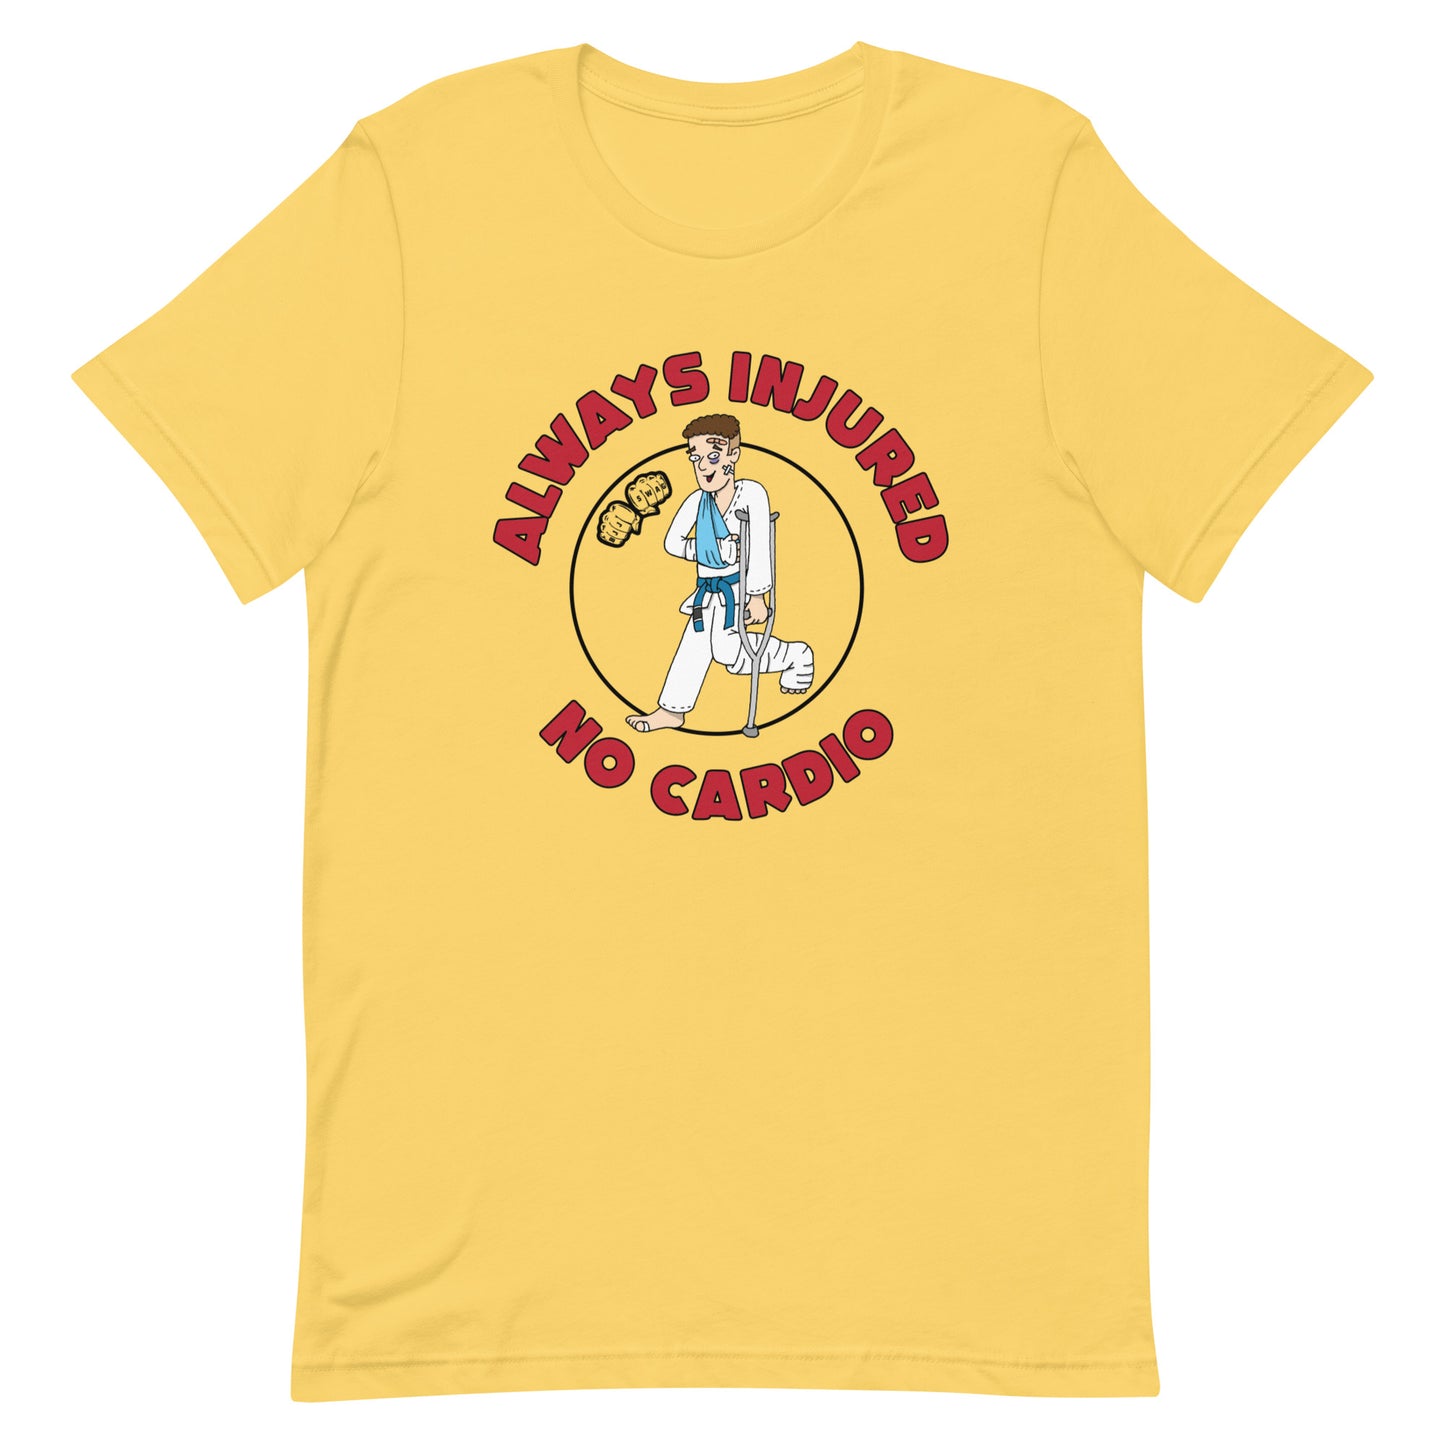 Always Injured and No Cardio Shirt - BJJ Swag